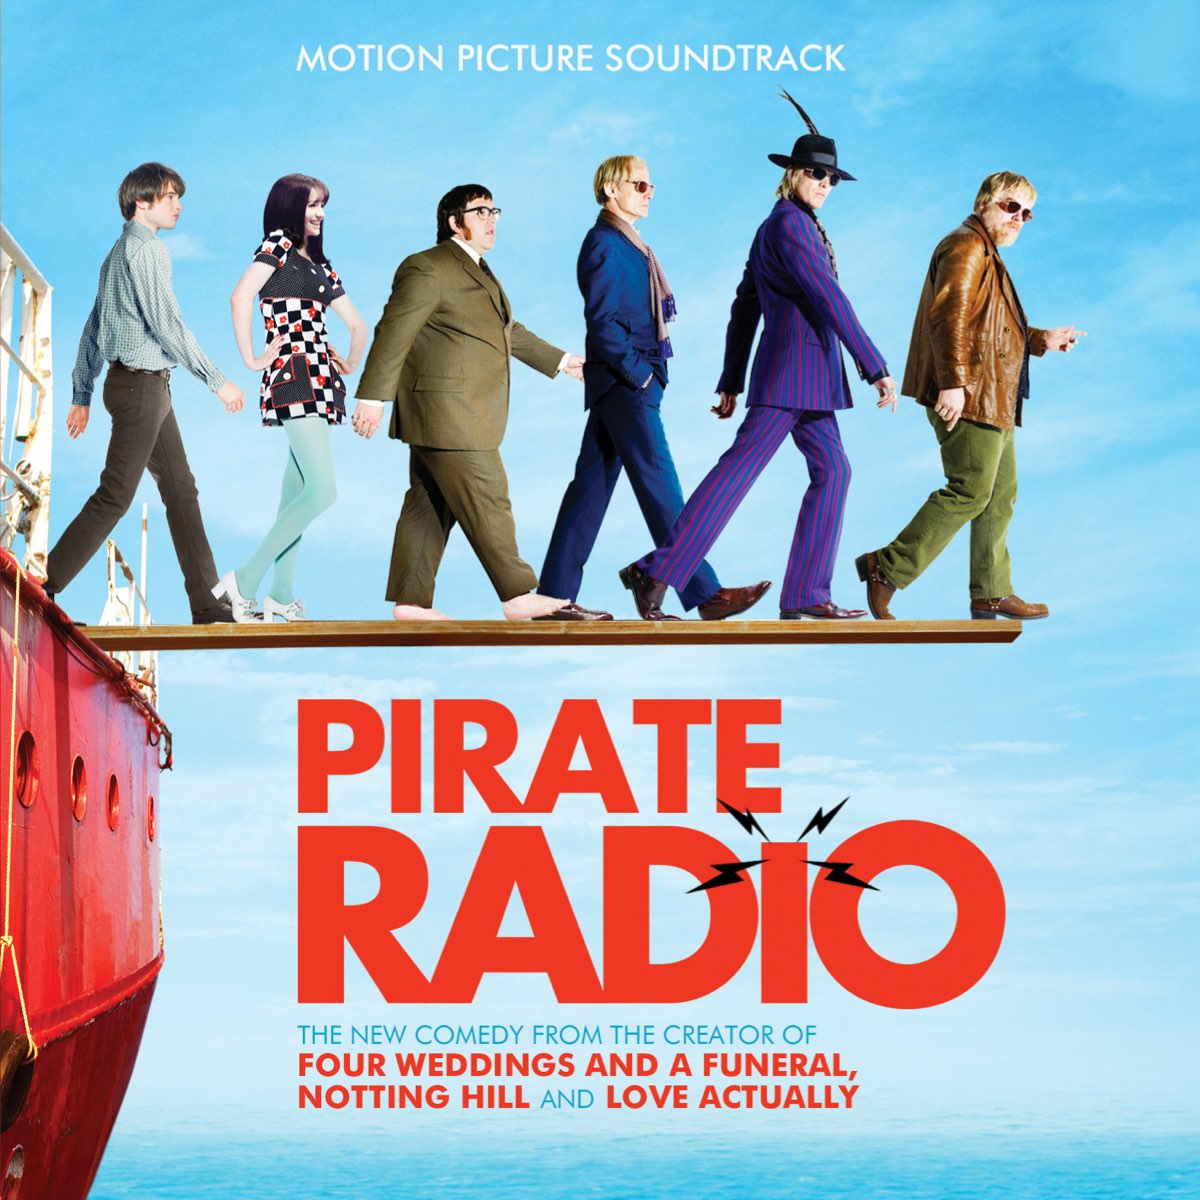 Pirate Radio (Motion Picture Soundtrack) [Deluxe Version] by Various  Artists on Apple Music